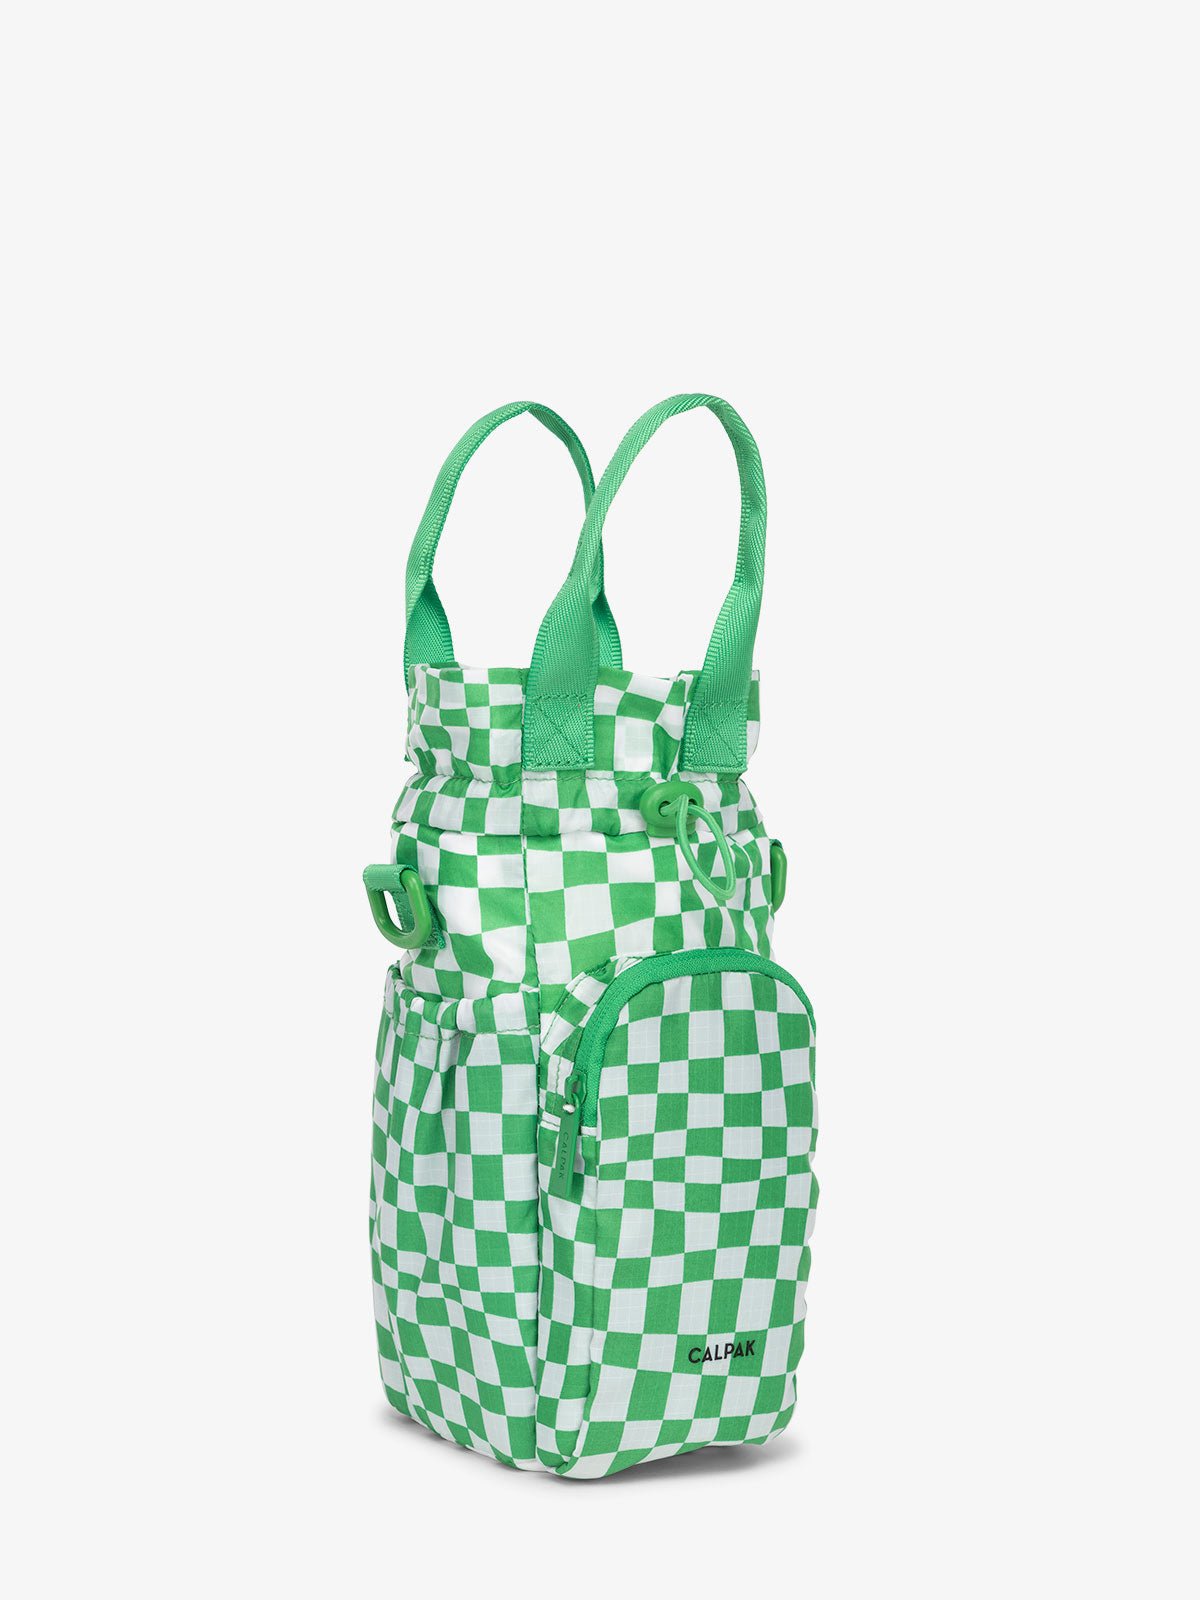 CALPAK Water Bottle Holder purse with zipped pocket for phone in green checkerboard